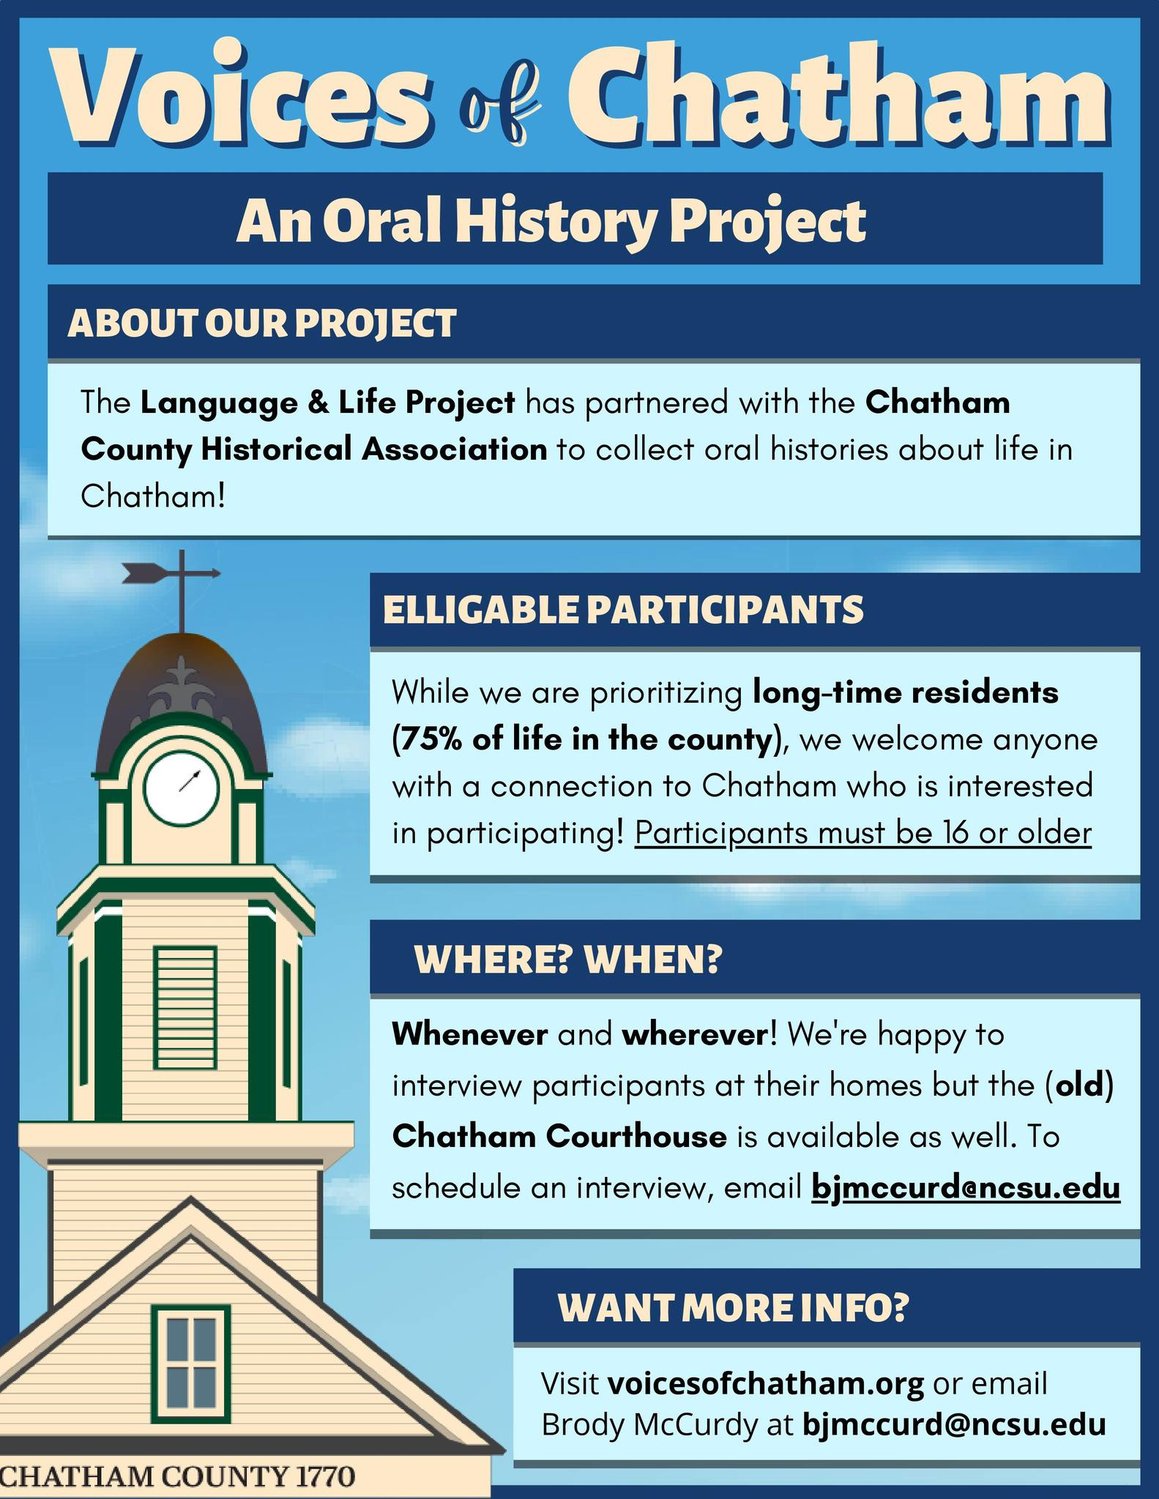 Voices of Chatham aims to tell the story of the county through oral history interviews.